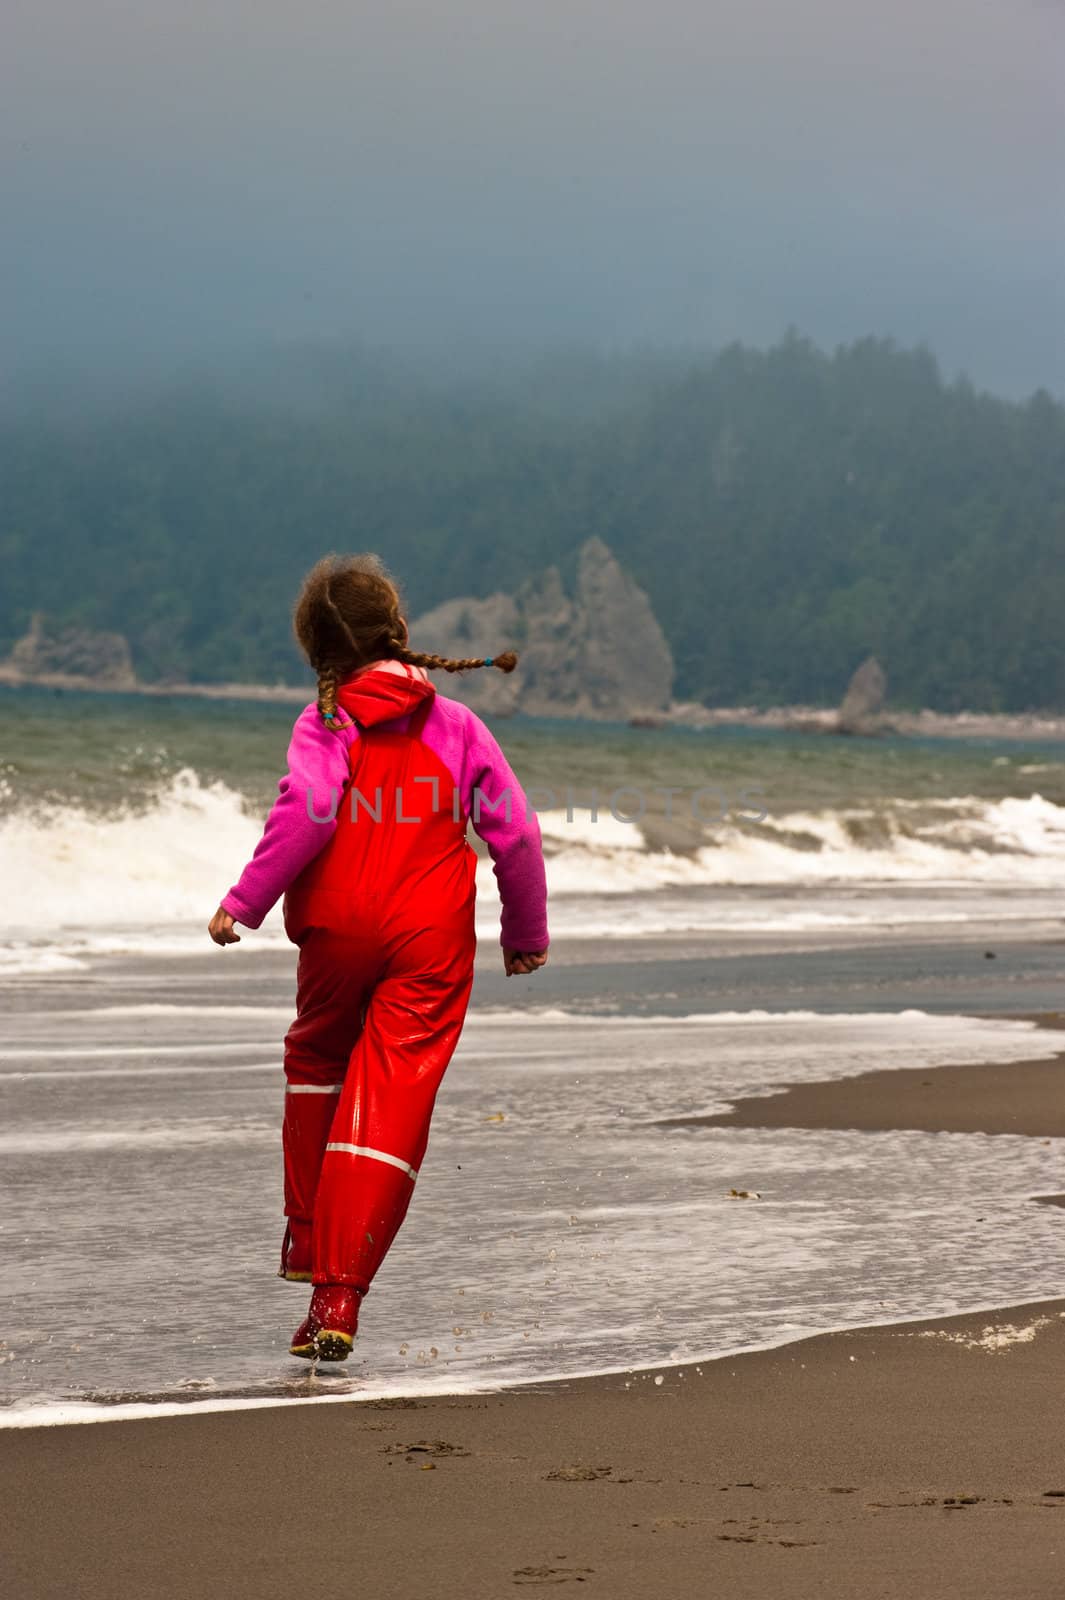 young girl in red rain clothes on ocean beach, Washngton, USA by rongreer